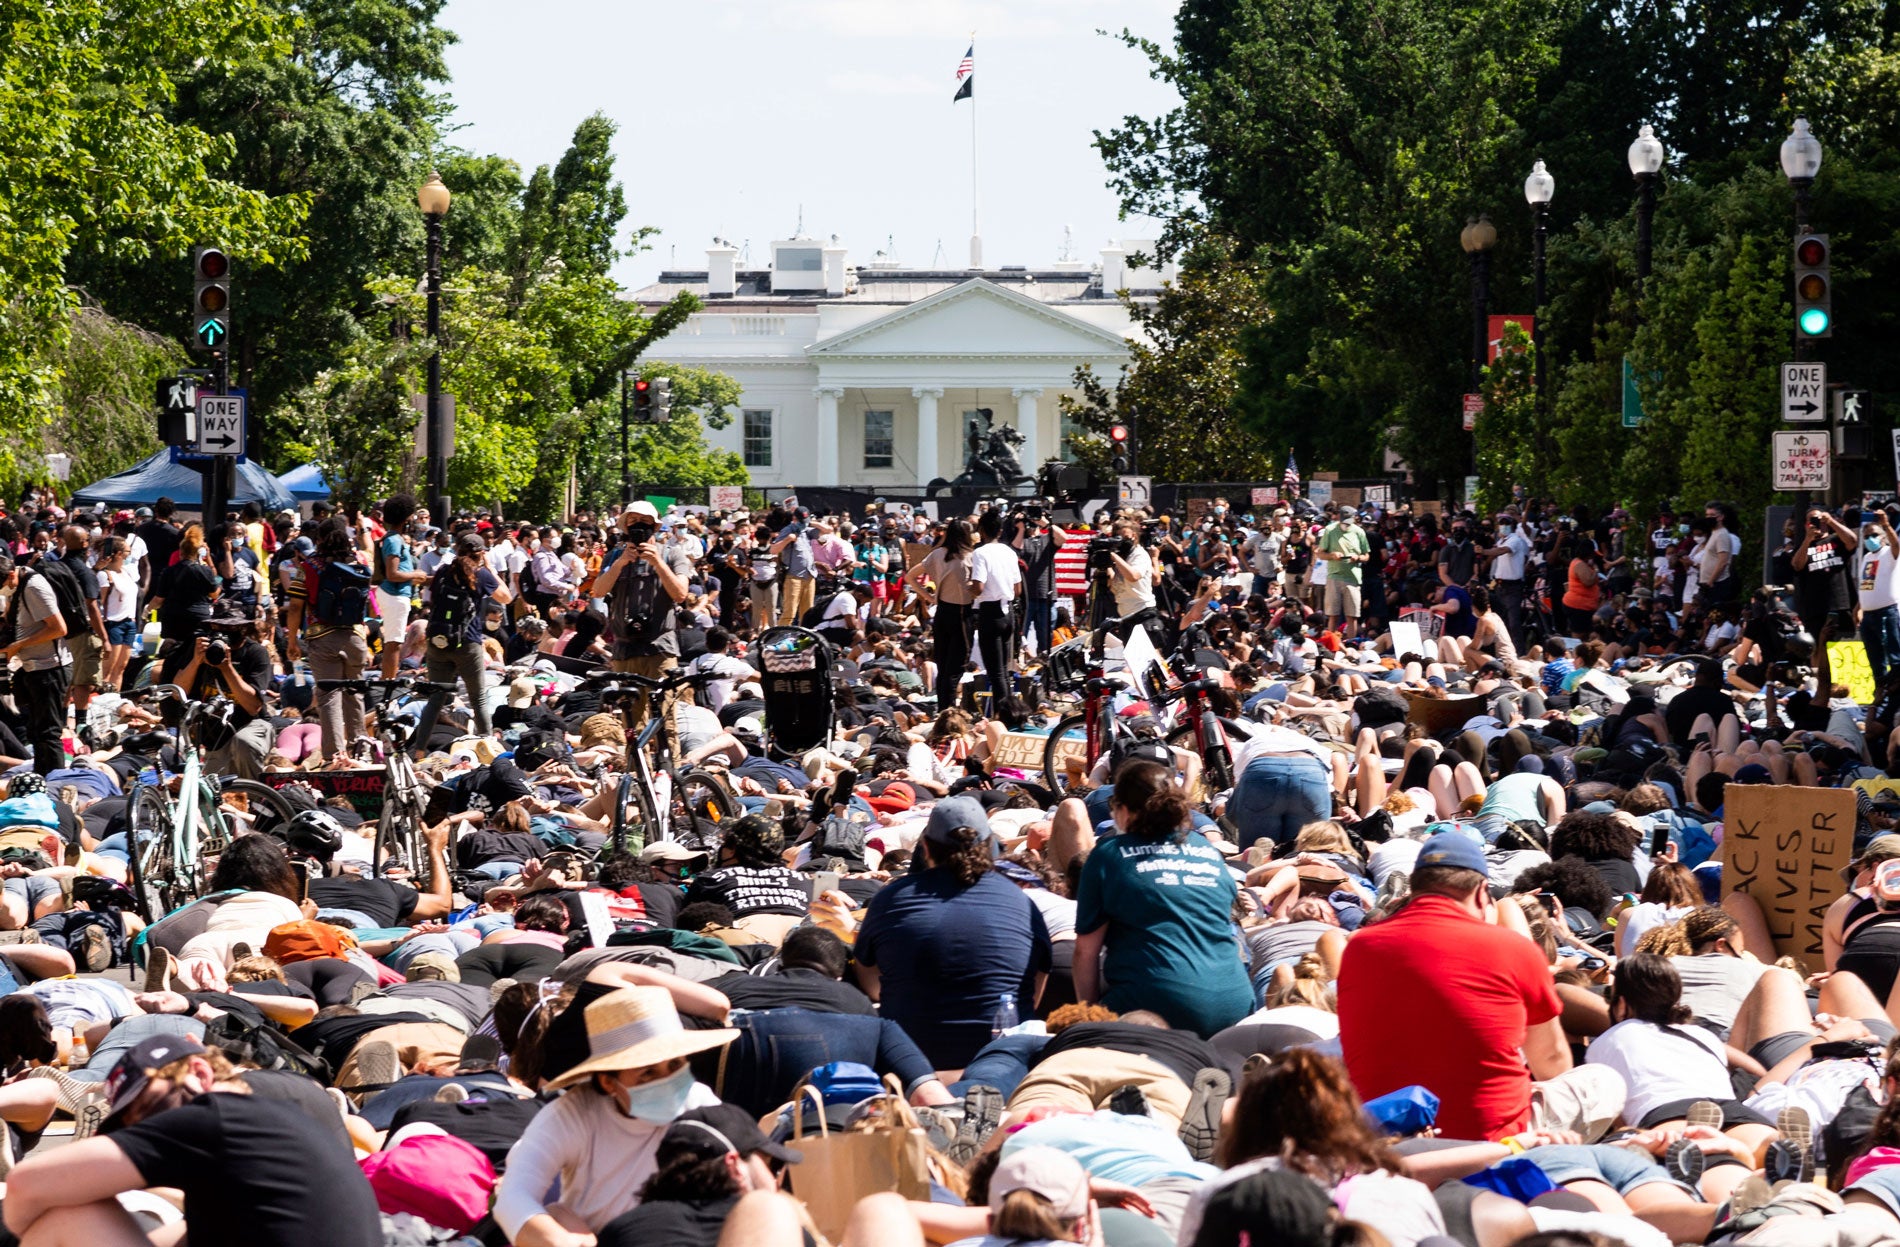 Demonstrators protest near the White House in Washington, DC, June 7, 2020, over the death of George Floyd, died after being restrained by Minneapolis police officers on May 25.